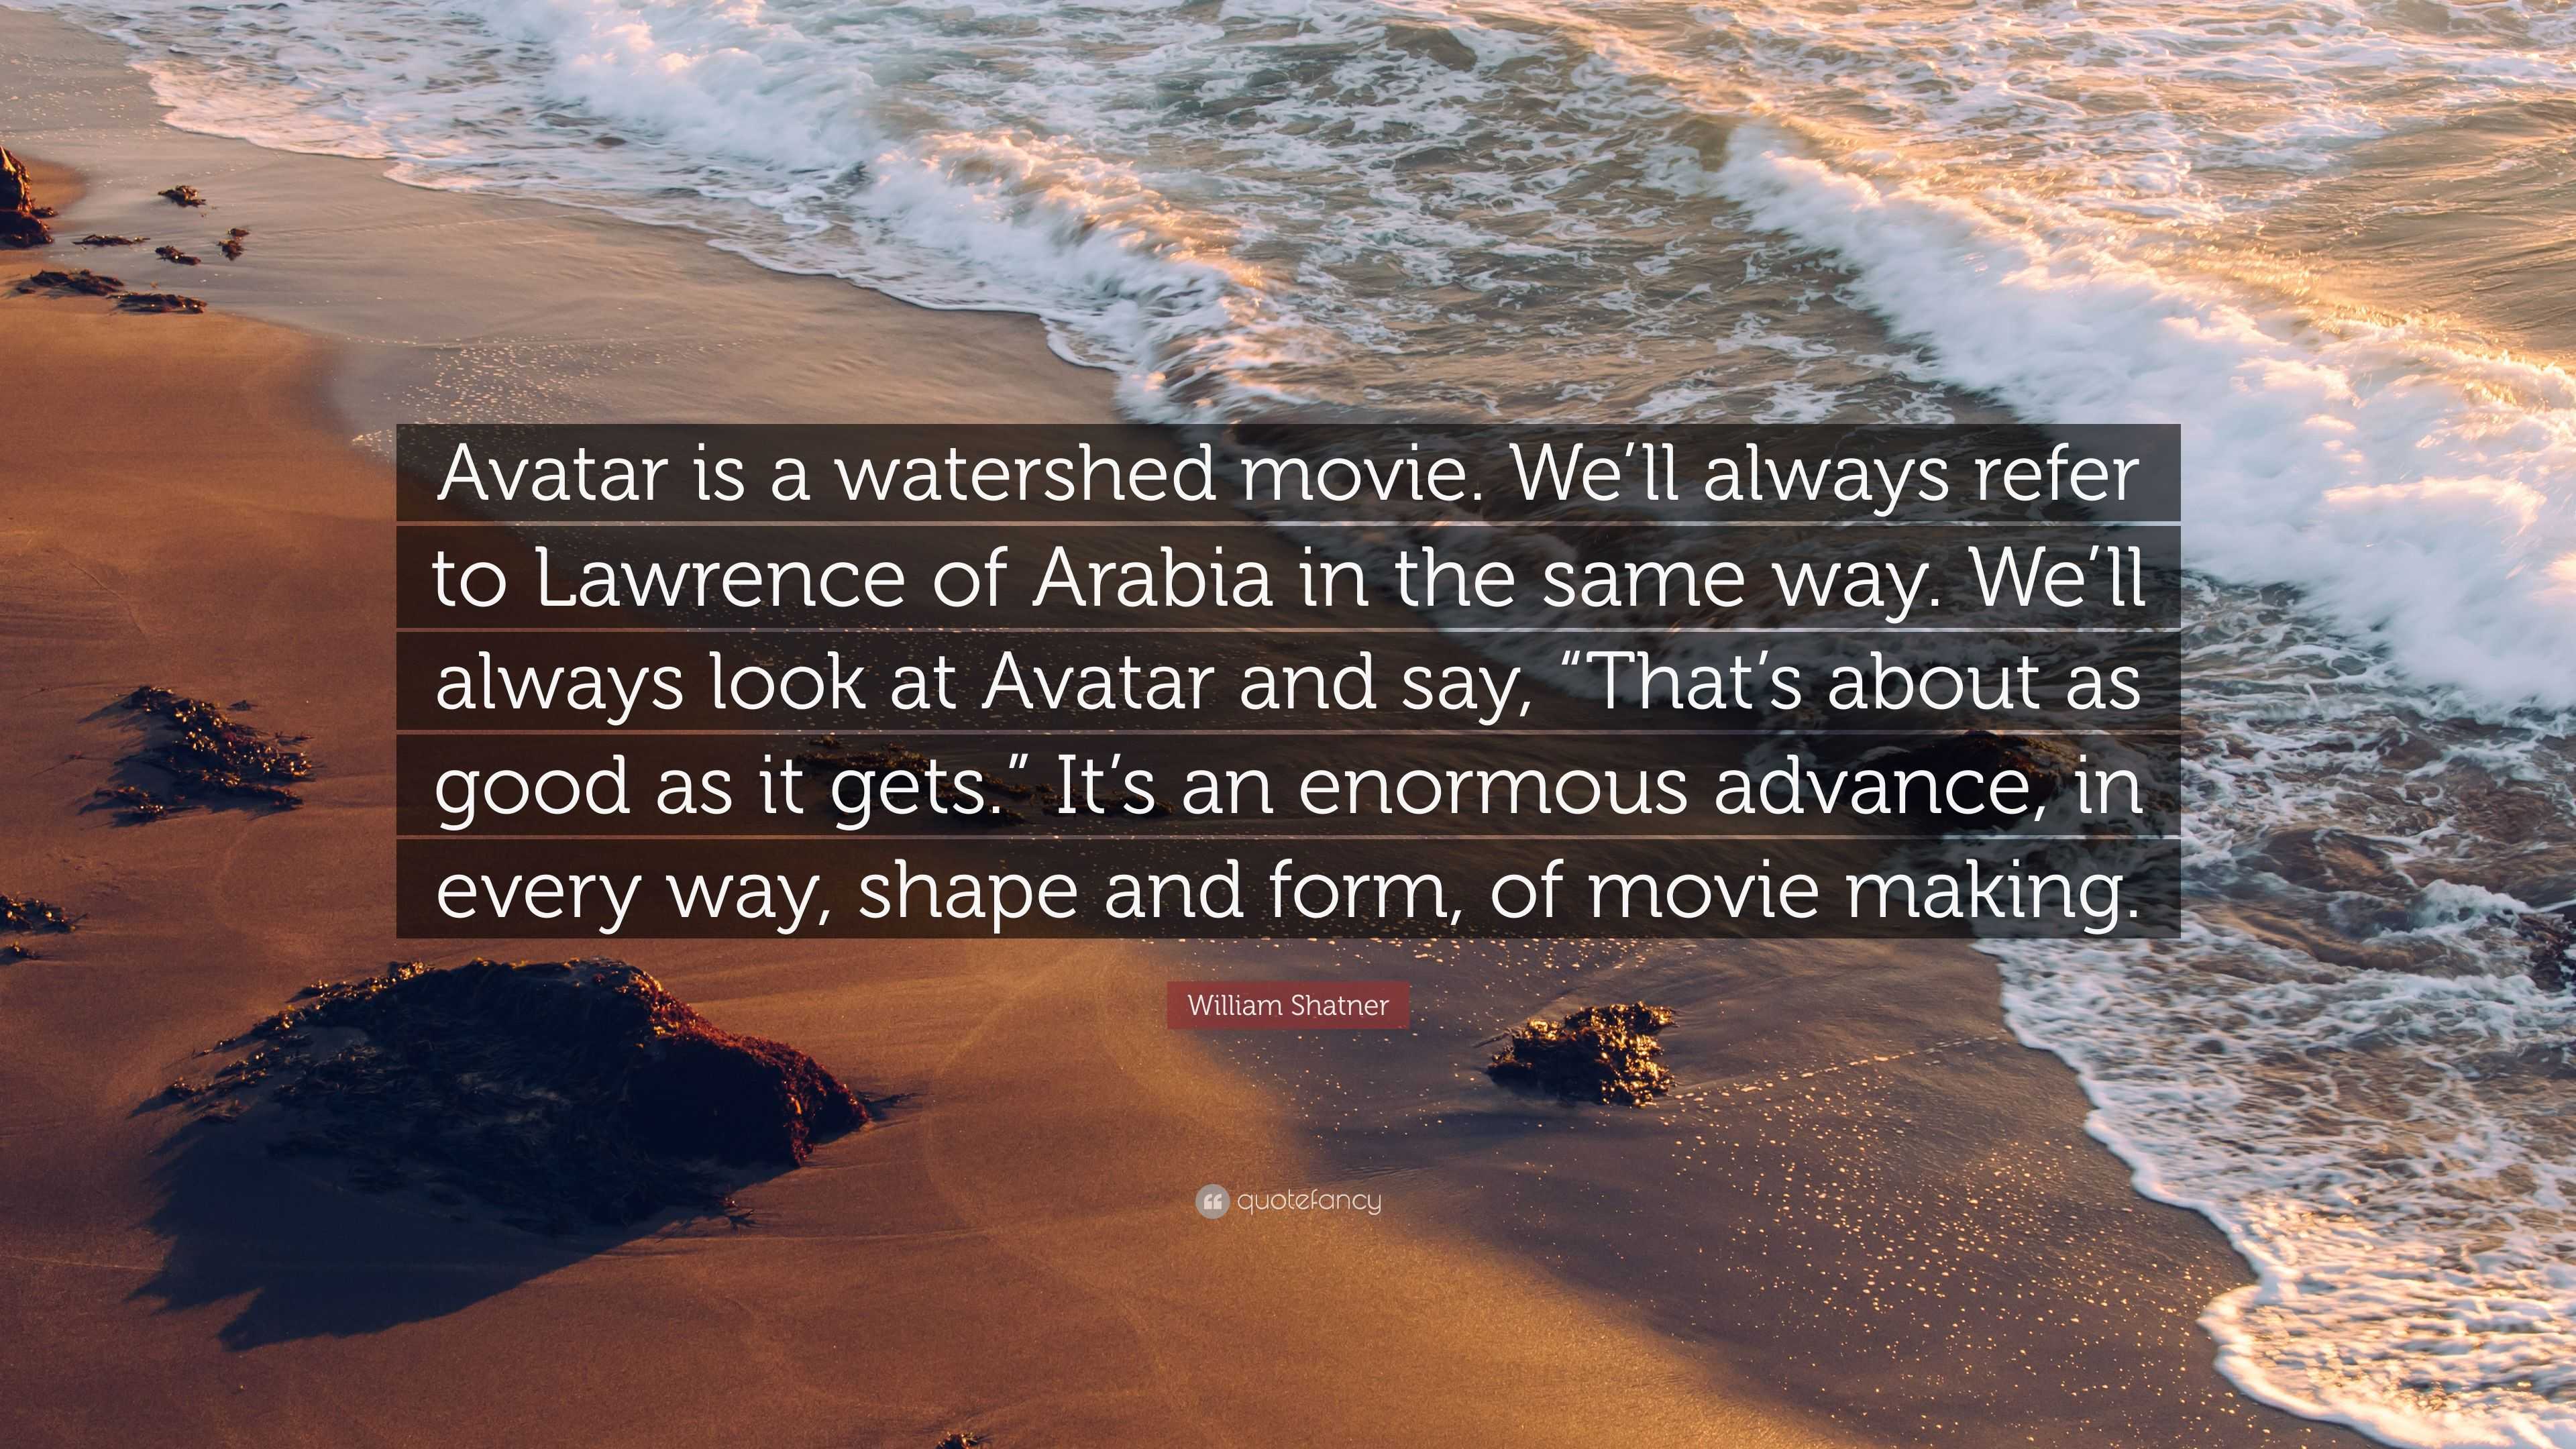 33 Katara Quotes from Avatar The Last Airbender Series